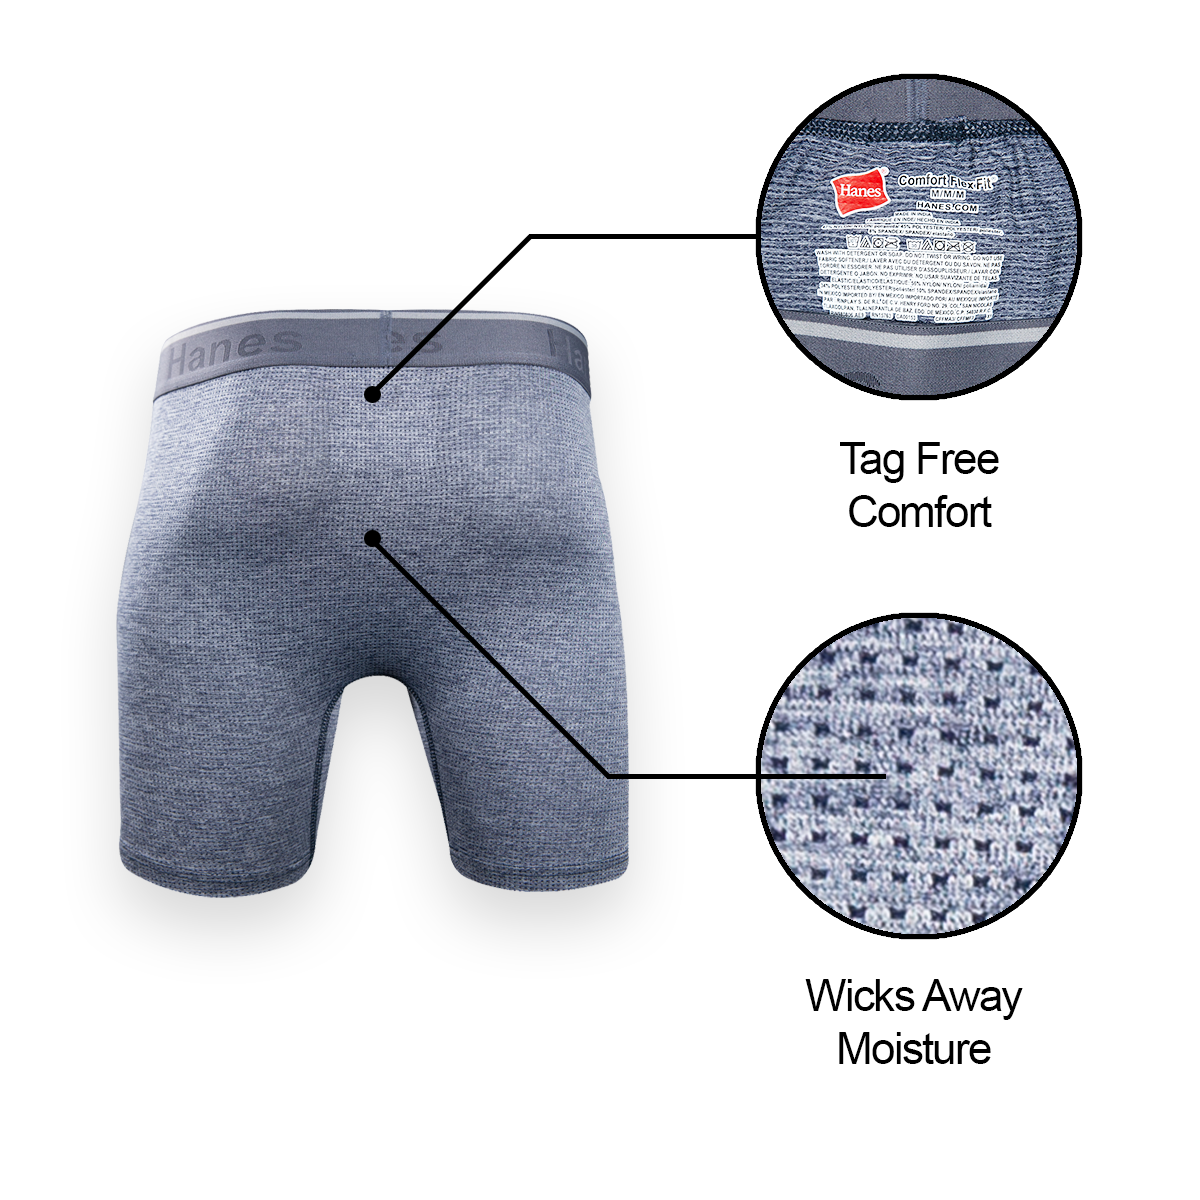 Hanes Men's 3 Pack Comfort Flex Fit Breathable Stretch Mesh Boxer Brie –  Spotted Clothing